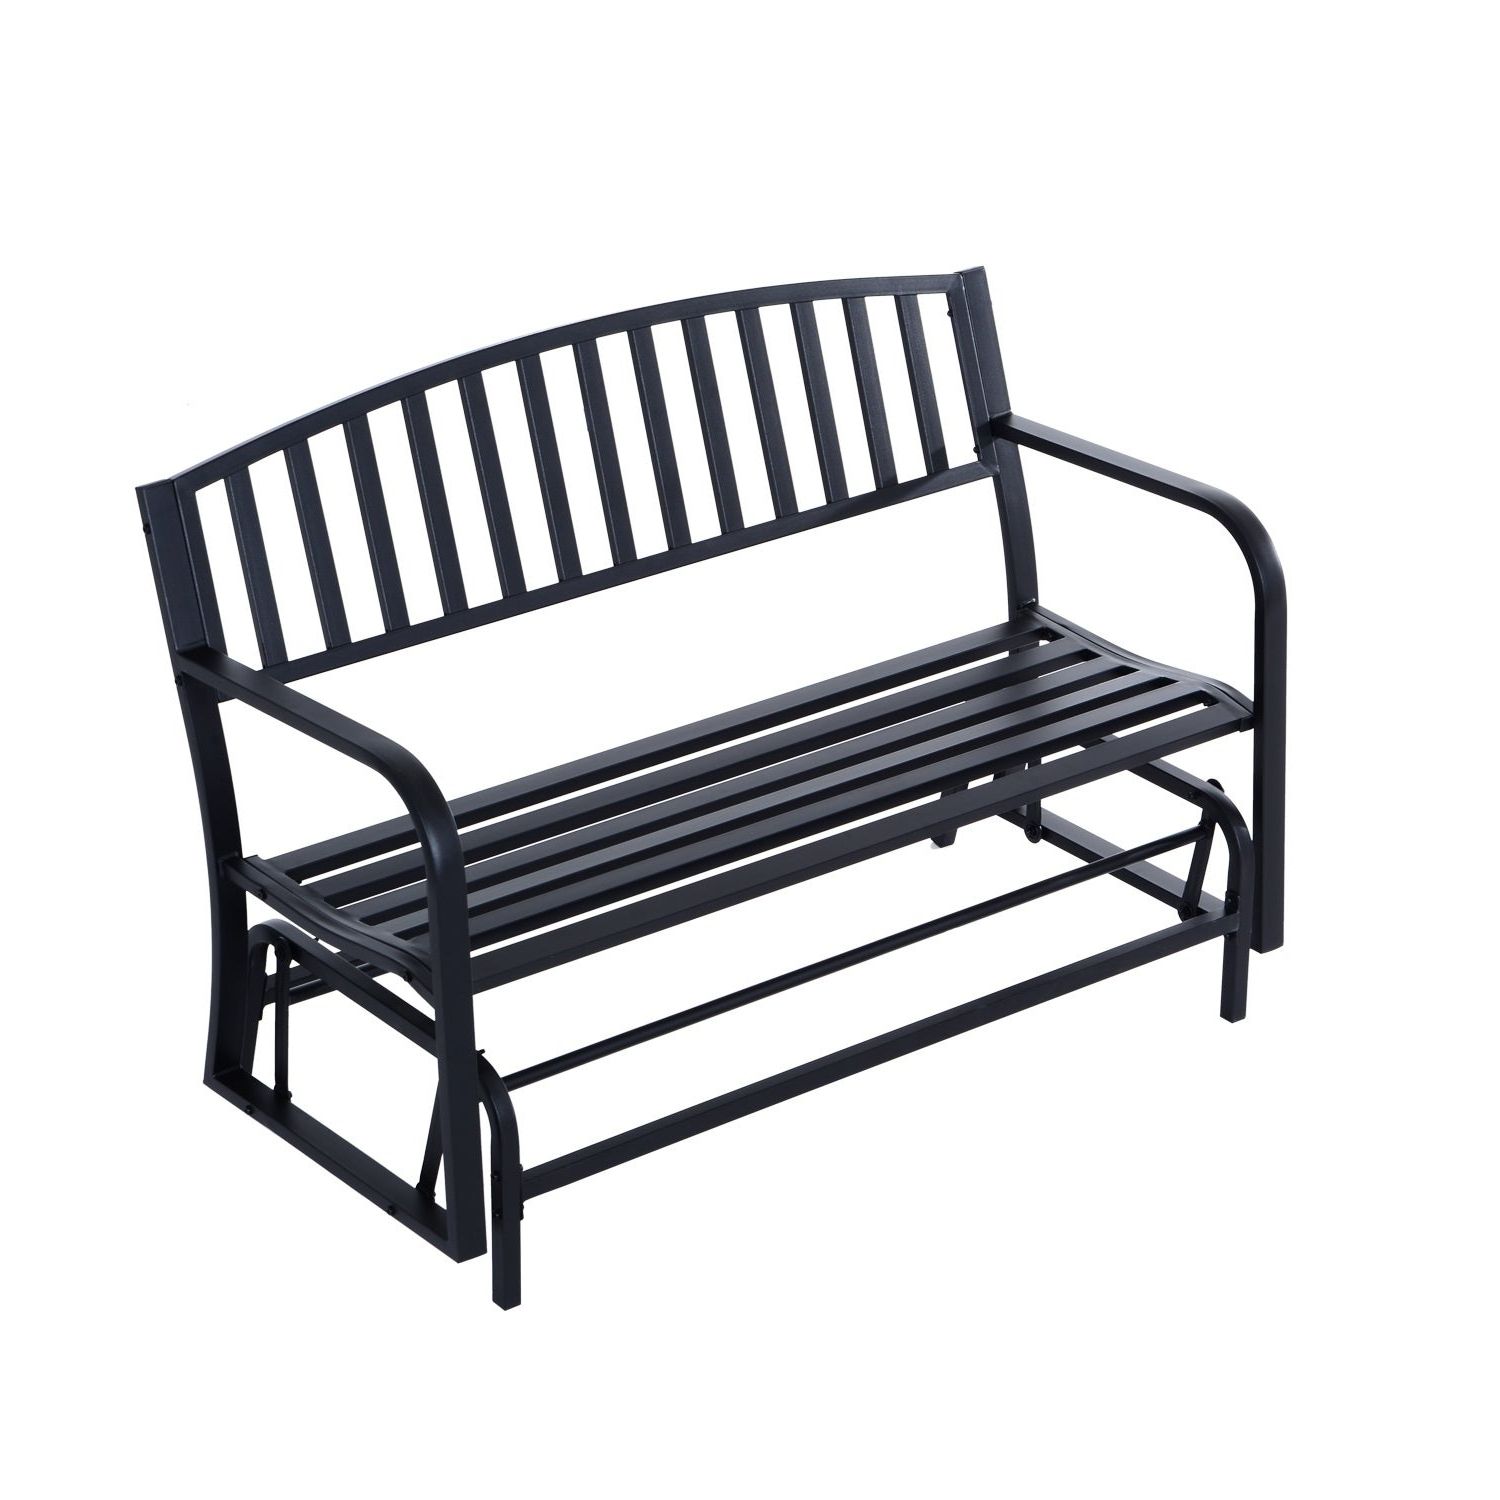 Outsunny 50 Inch Outdoor Steel Patio Swing Glider Bench – Black Intended For Newest Outdoor Swing Glider Chairs With Powder Coated Steel Frame (View 10 of 25)